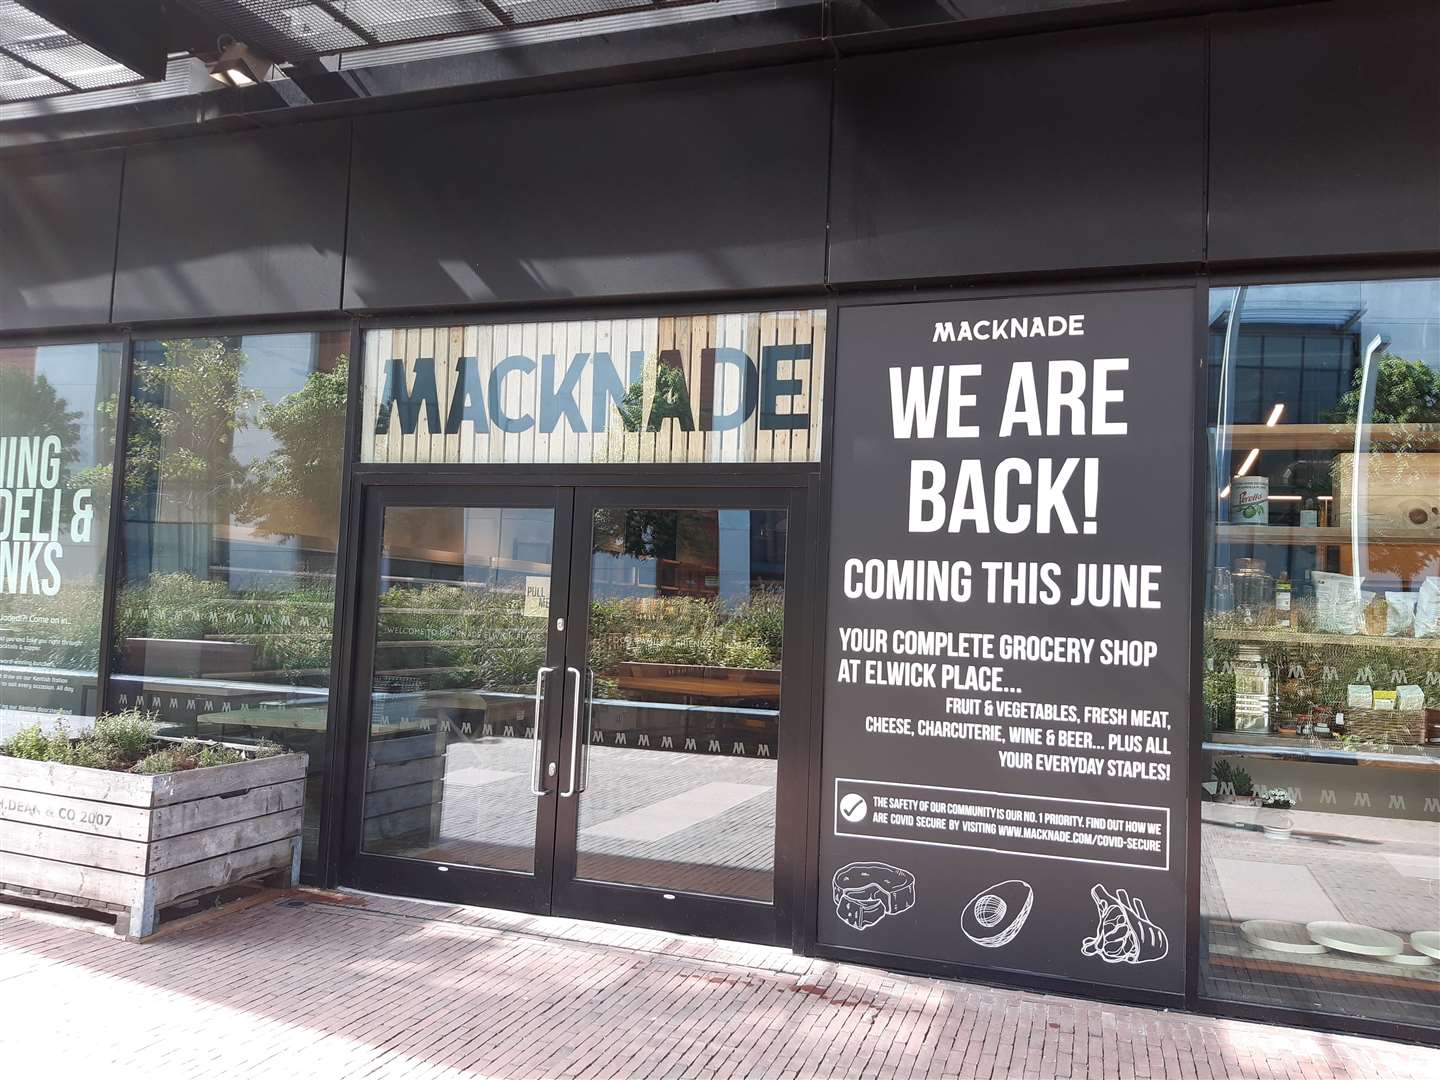 Macknade's Elwick Place shop will also be offering the discount